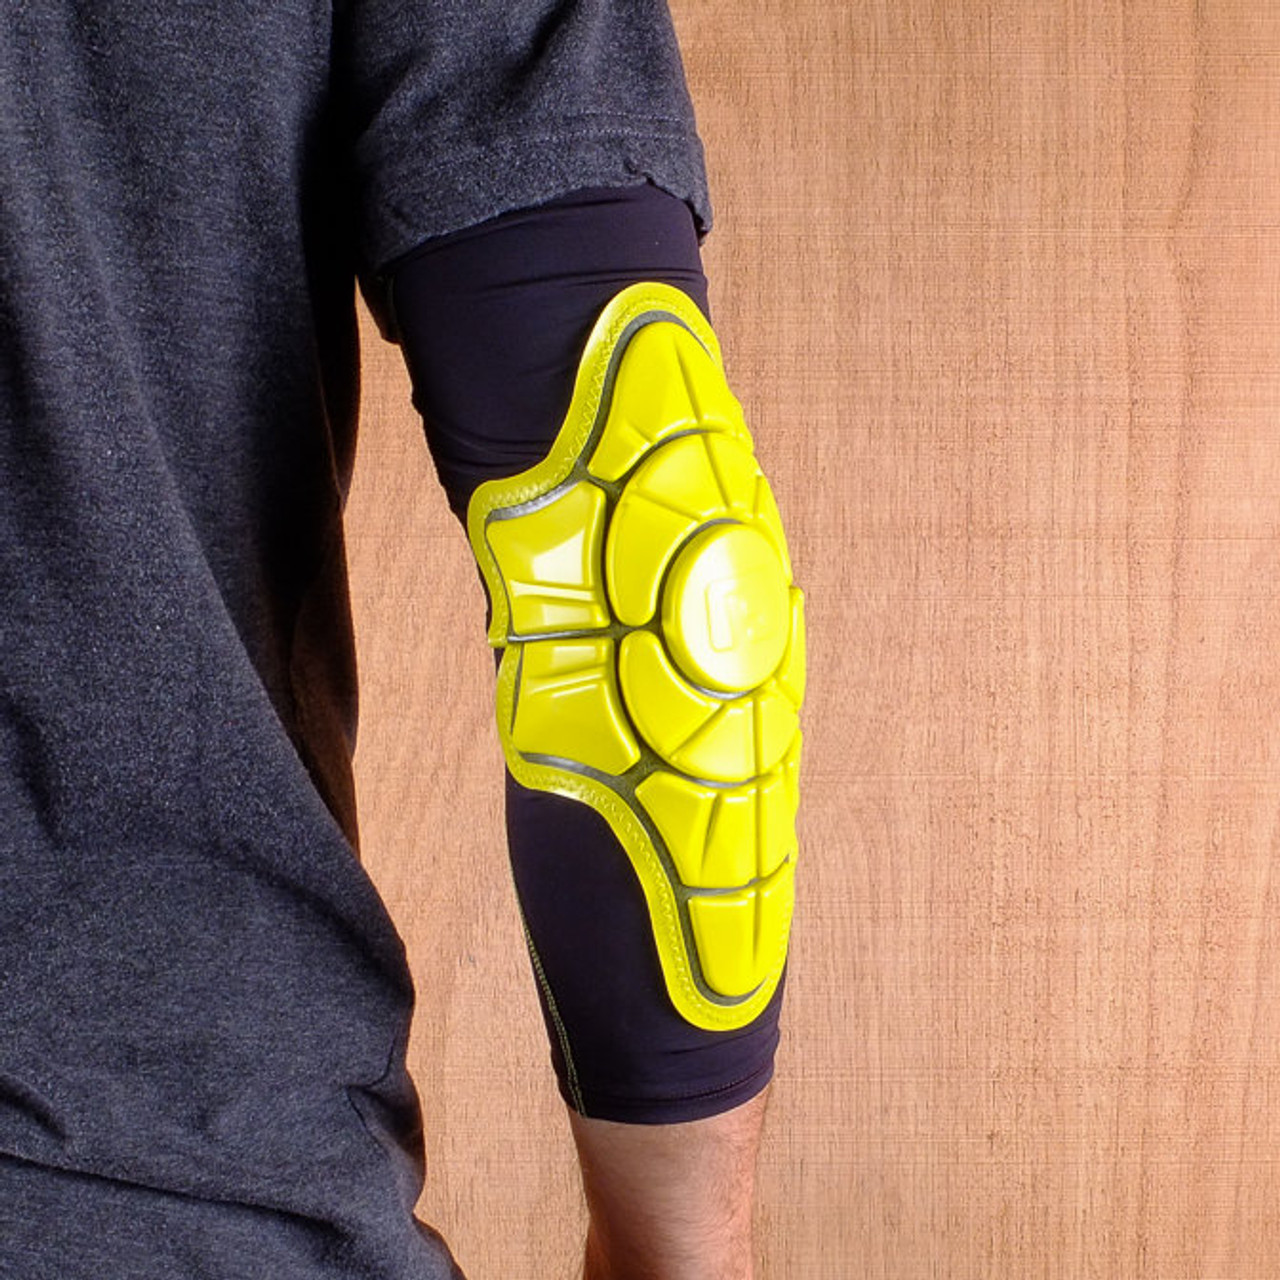 g-form-pro-x-yellow-elbow-pads-the-longboard-store